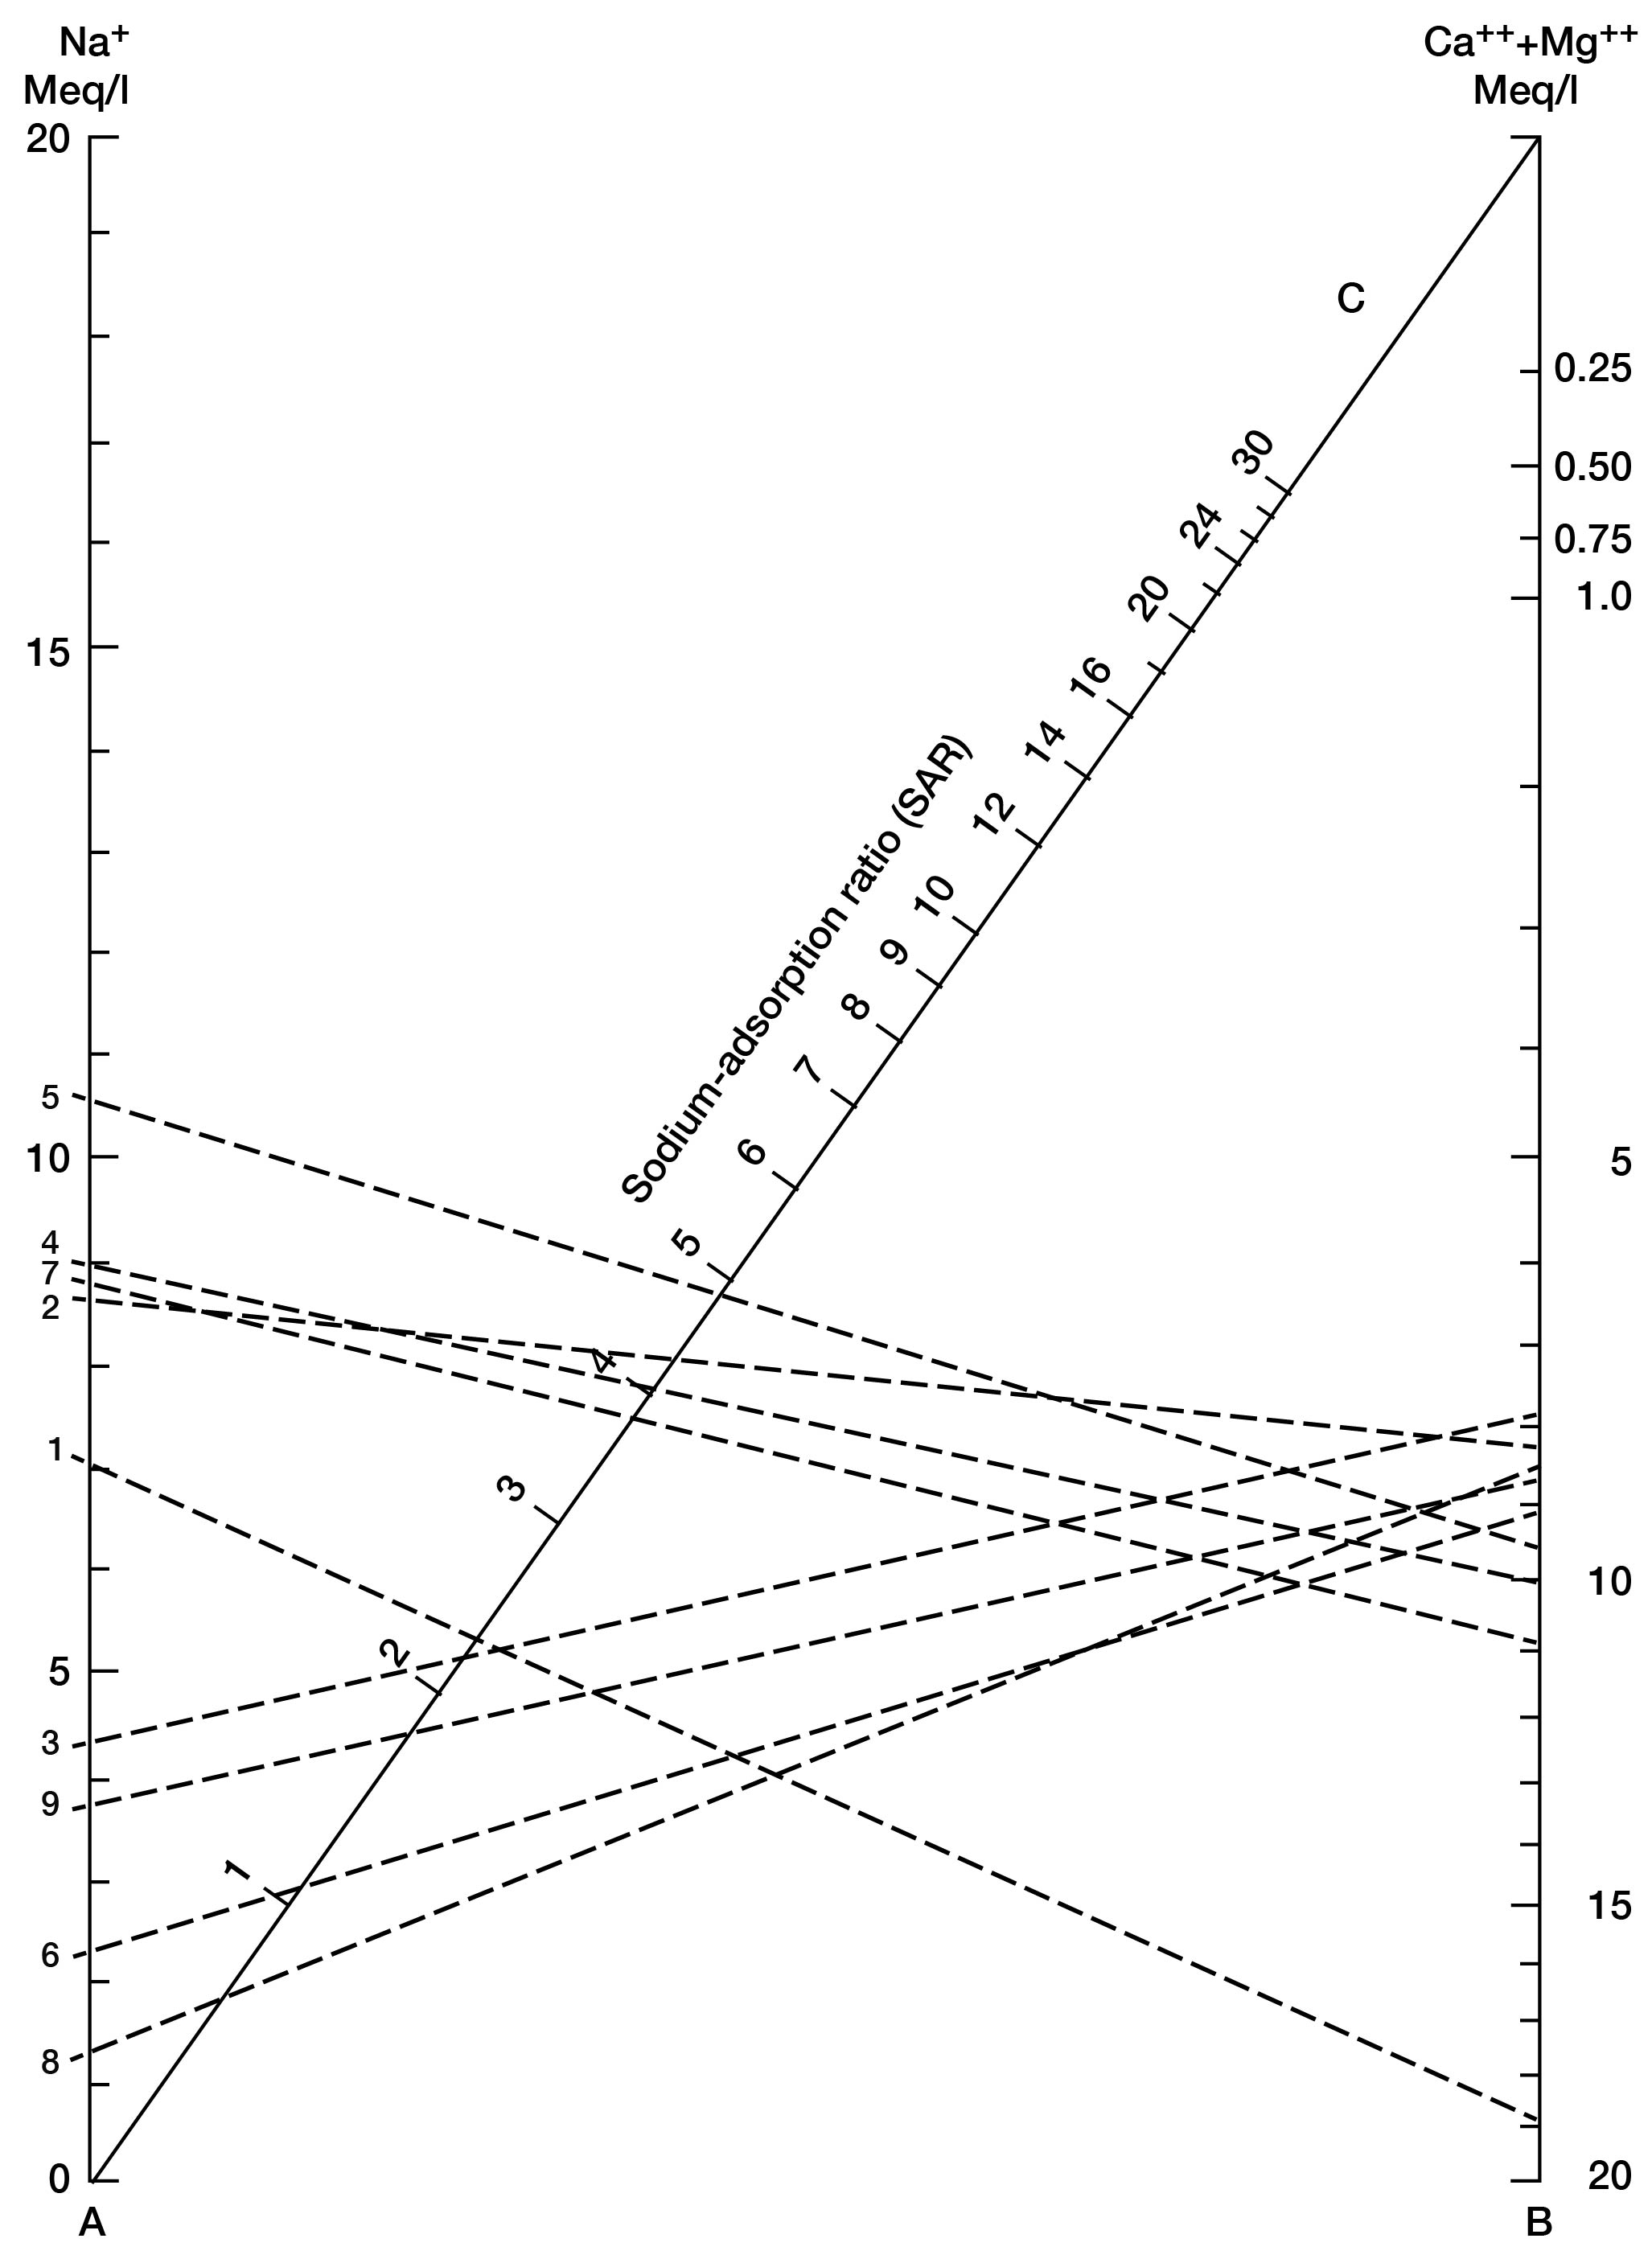 Graphical method of finding sodium-adsorption ratio by plotting sodium and calcium+magnesium values and connecting the line.